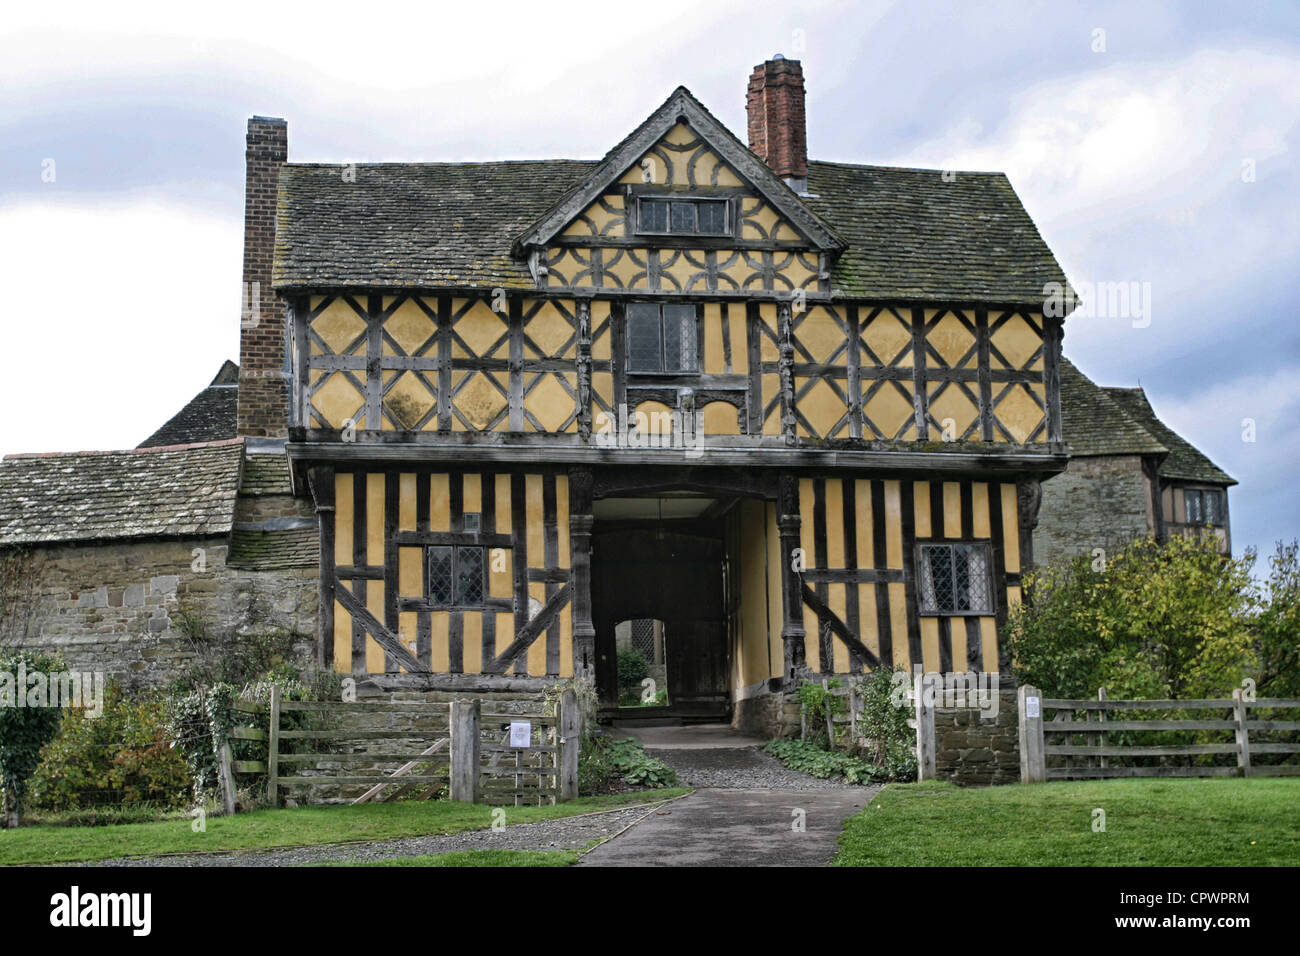 17th Century gatehouse of Stokesay Castle, a fortified manor house built on the English/Welsh border in the late 13th century. Stock Photo